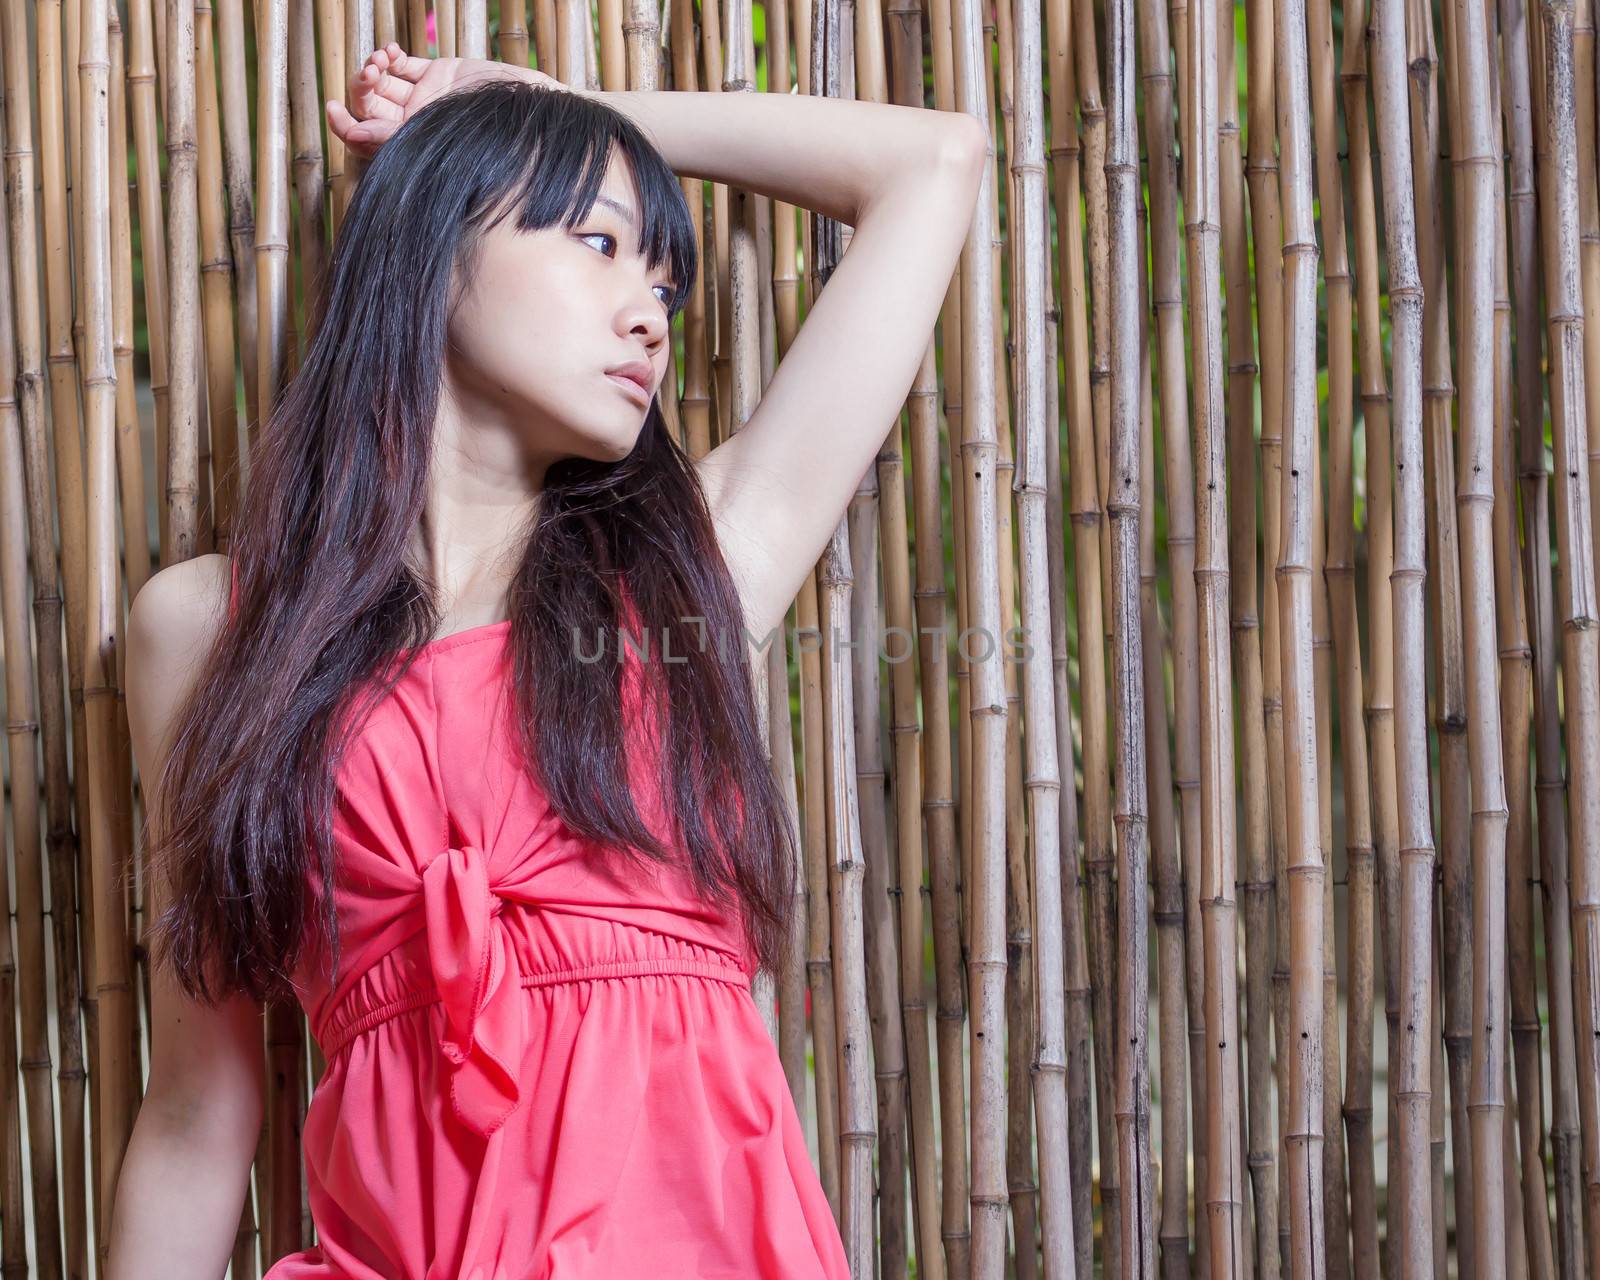 Asian girl sitting against bamboo wall